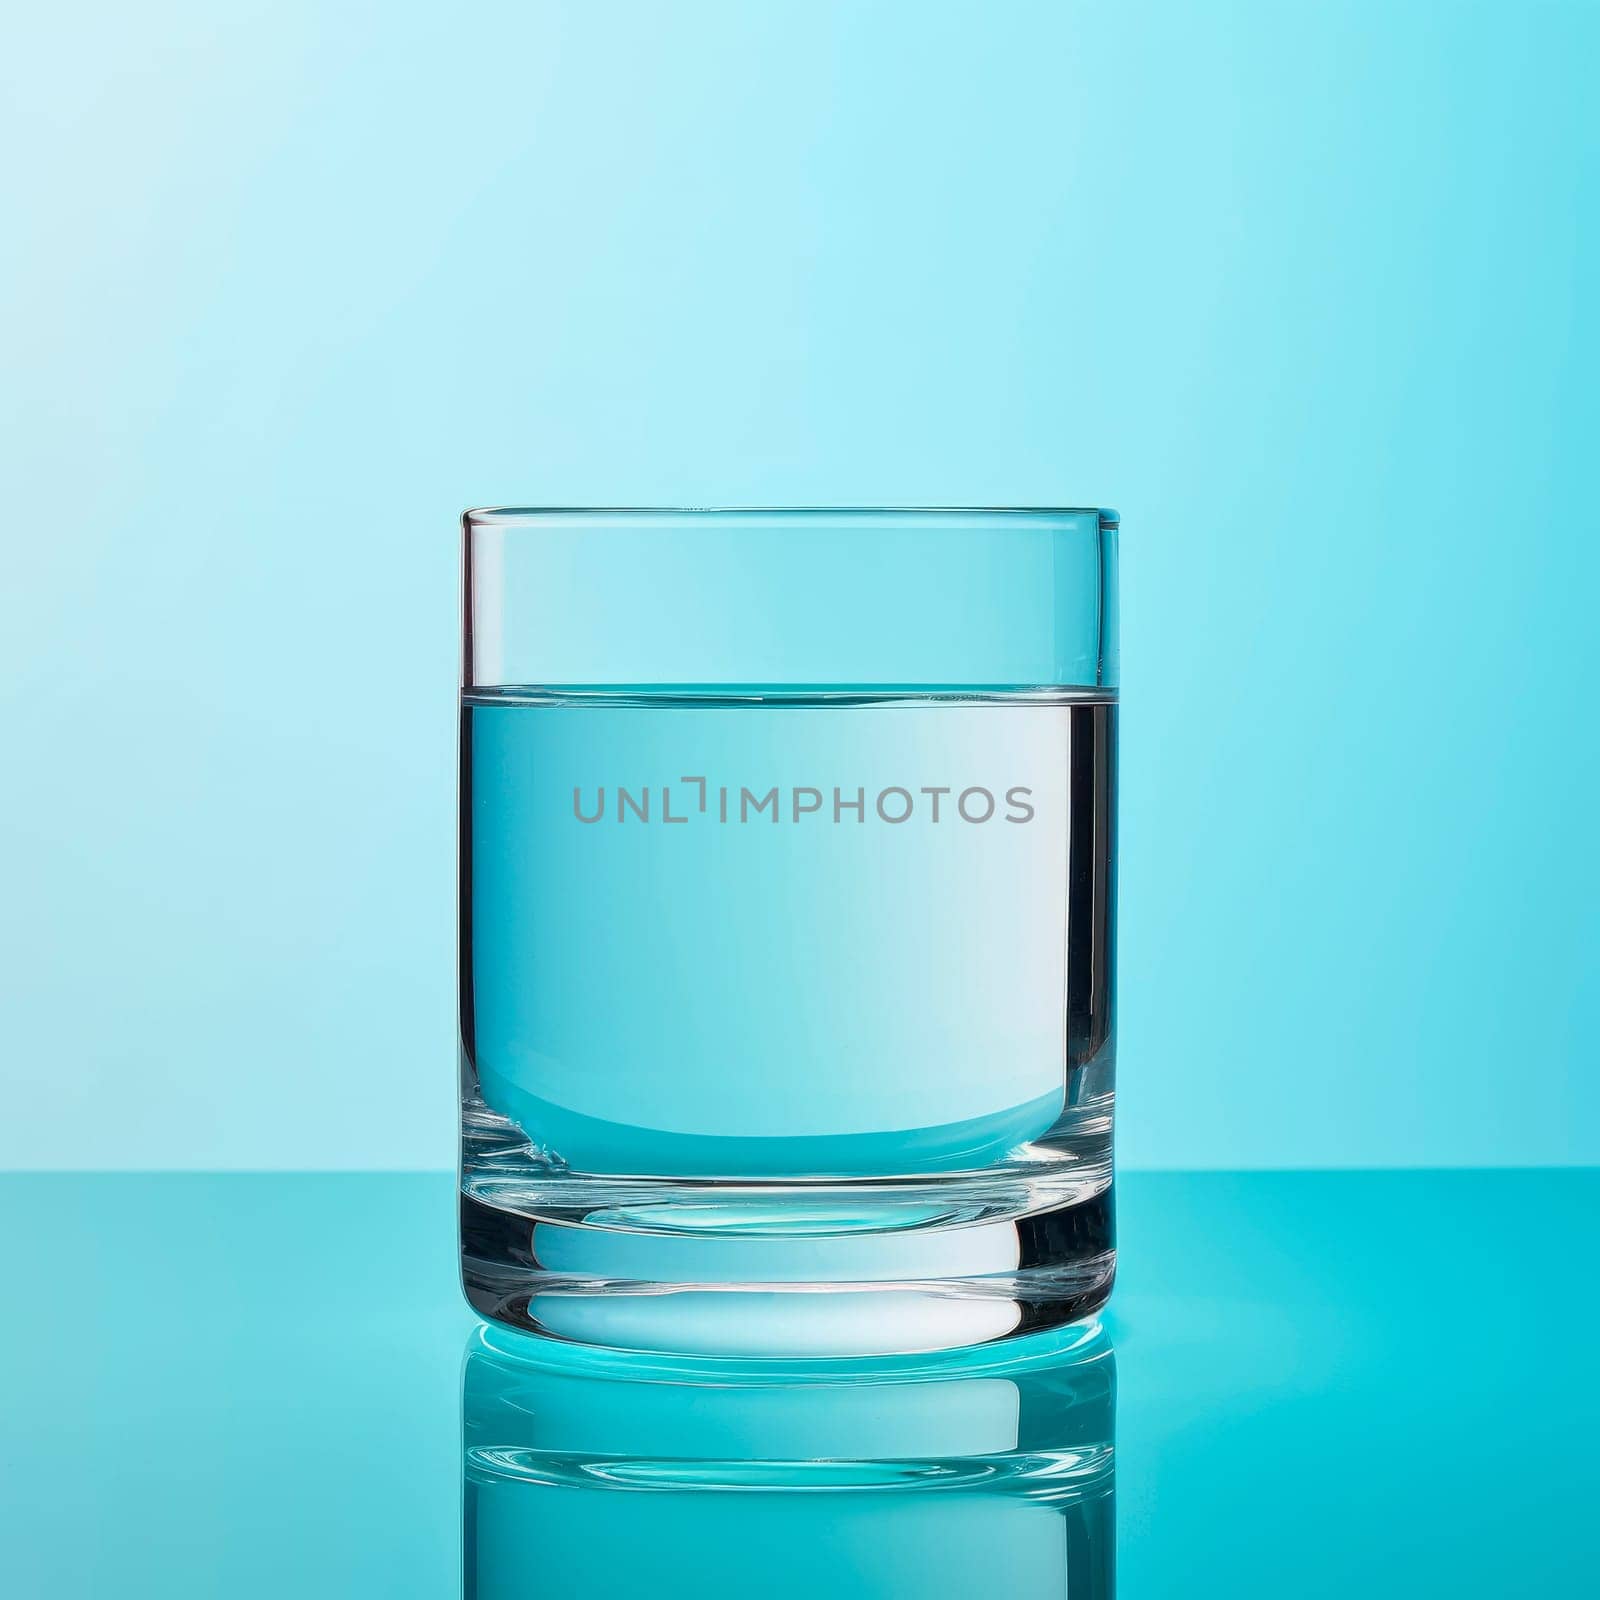 A glass of clean drinking water on a light blue background by Spirina